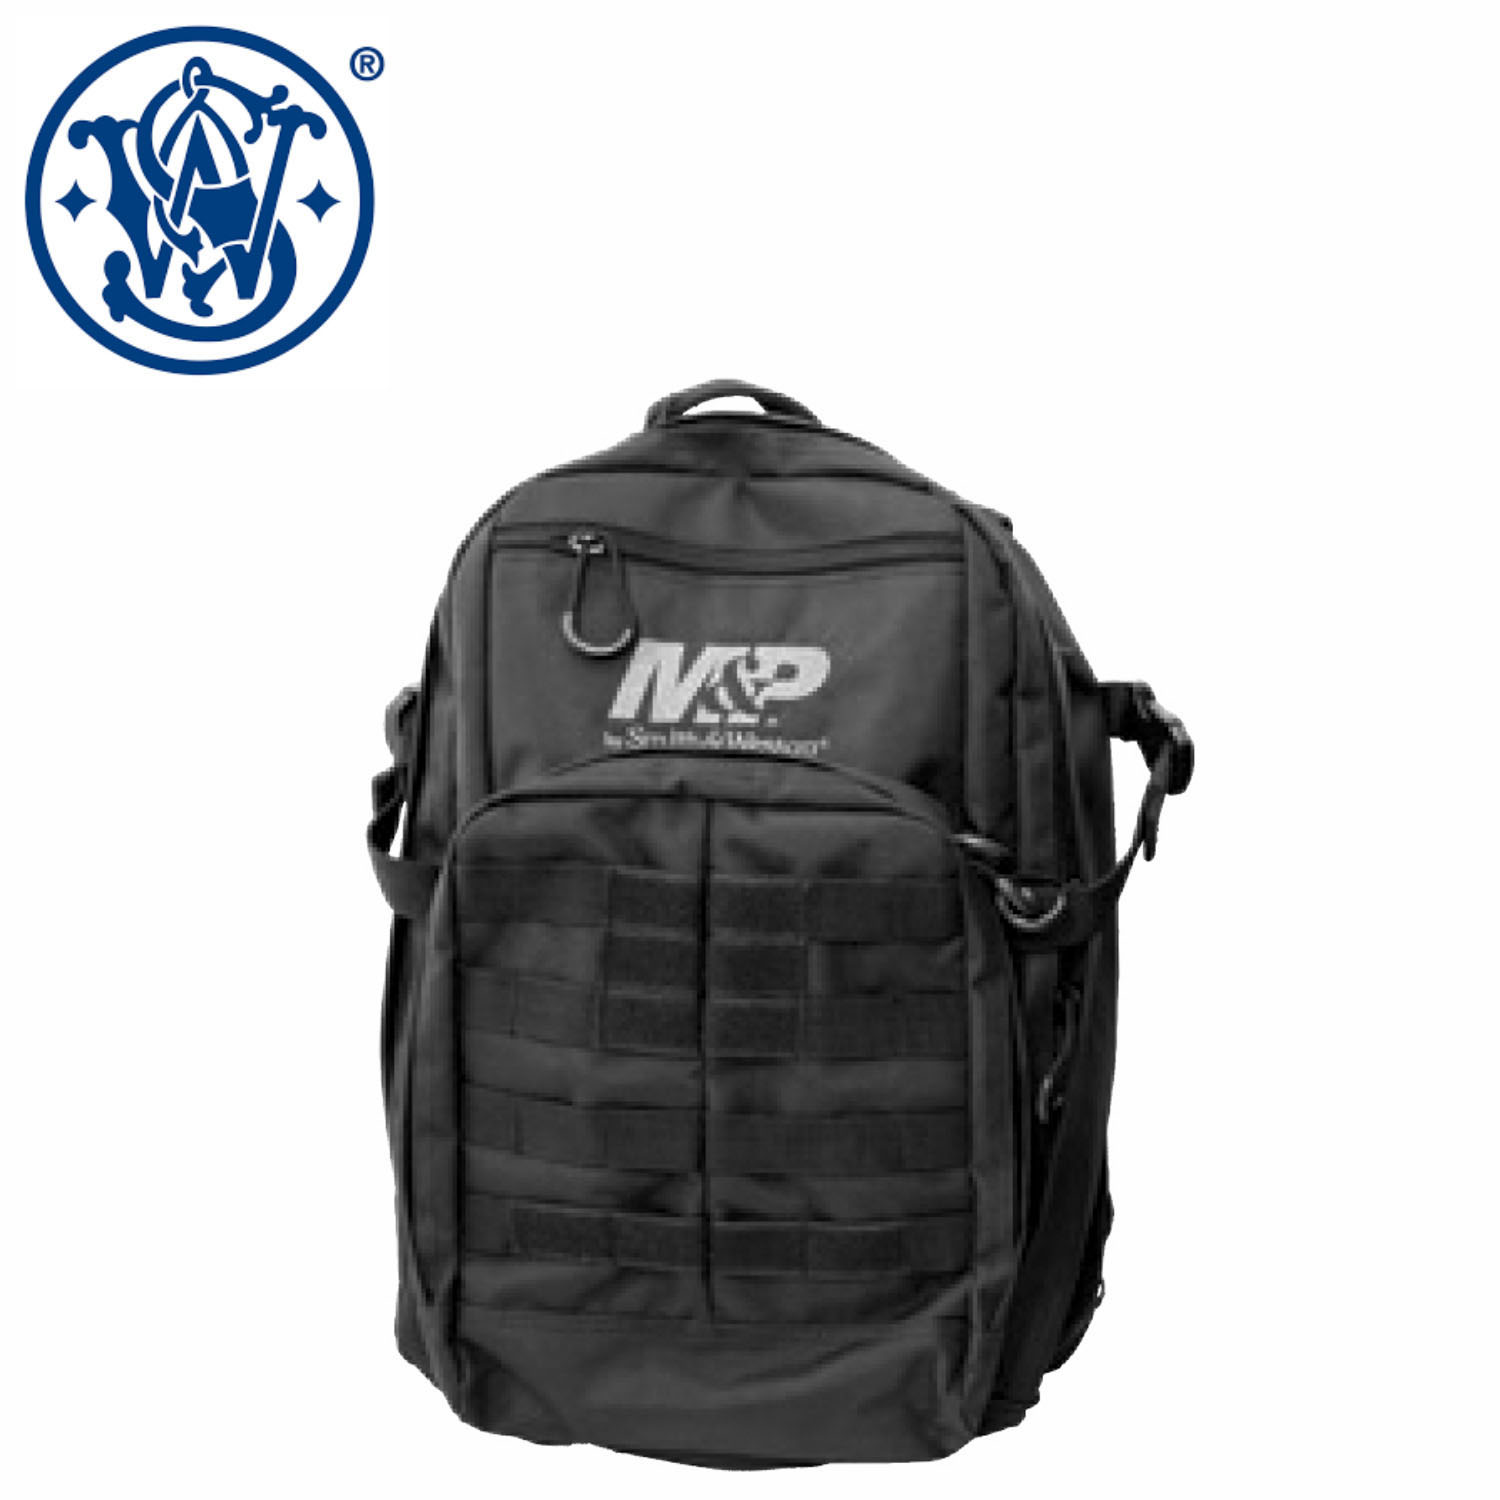 Smith & Wesson S&W M&P Duty Series Backpack 